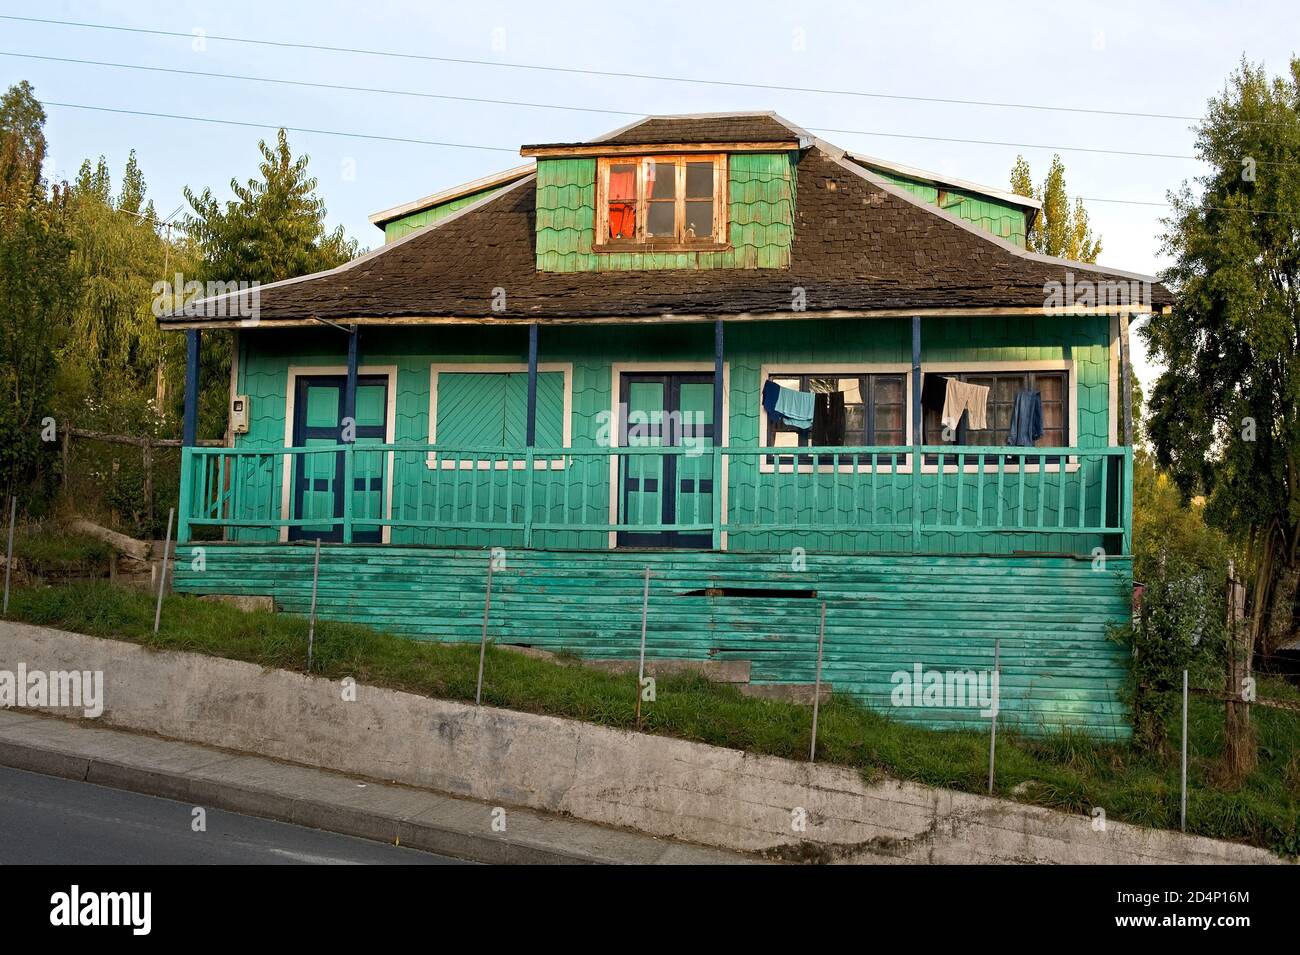 Lemuy Island, Chiloé Archipelago/ Chile - March 23 2014: Colorful house in Ichuac Stock Photo